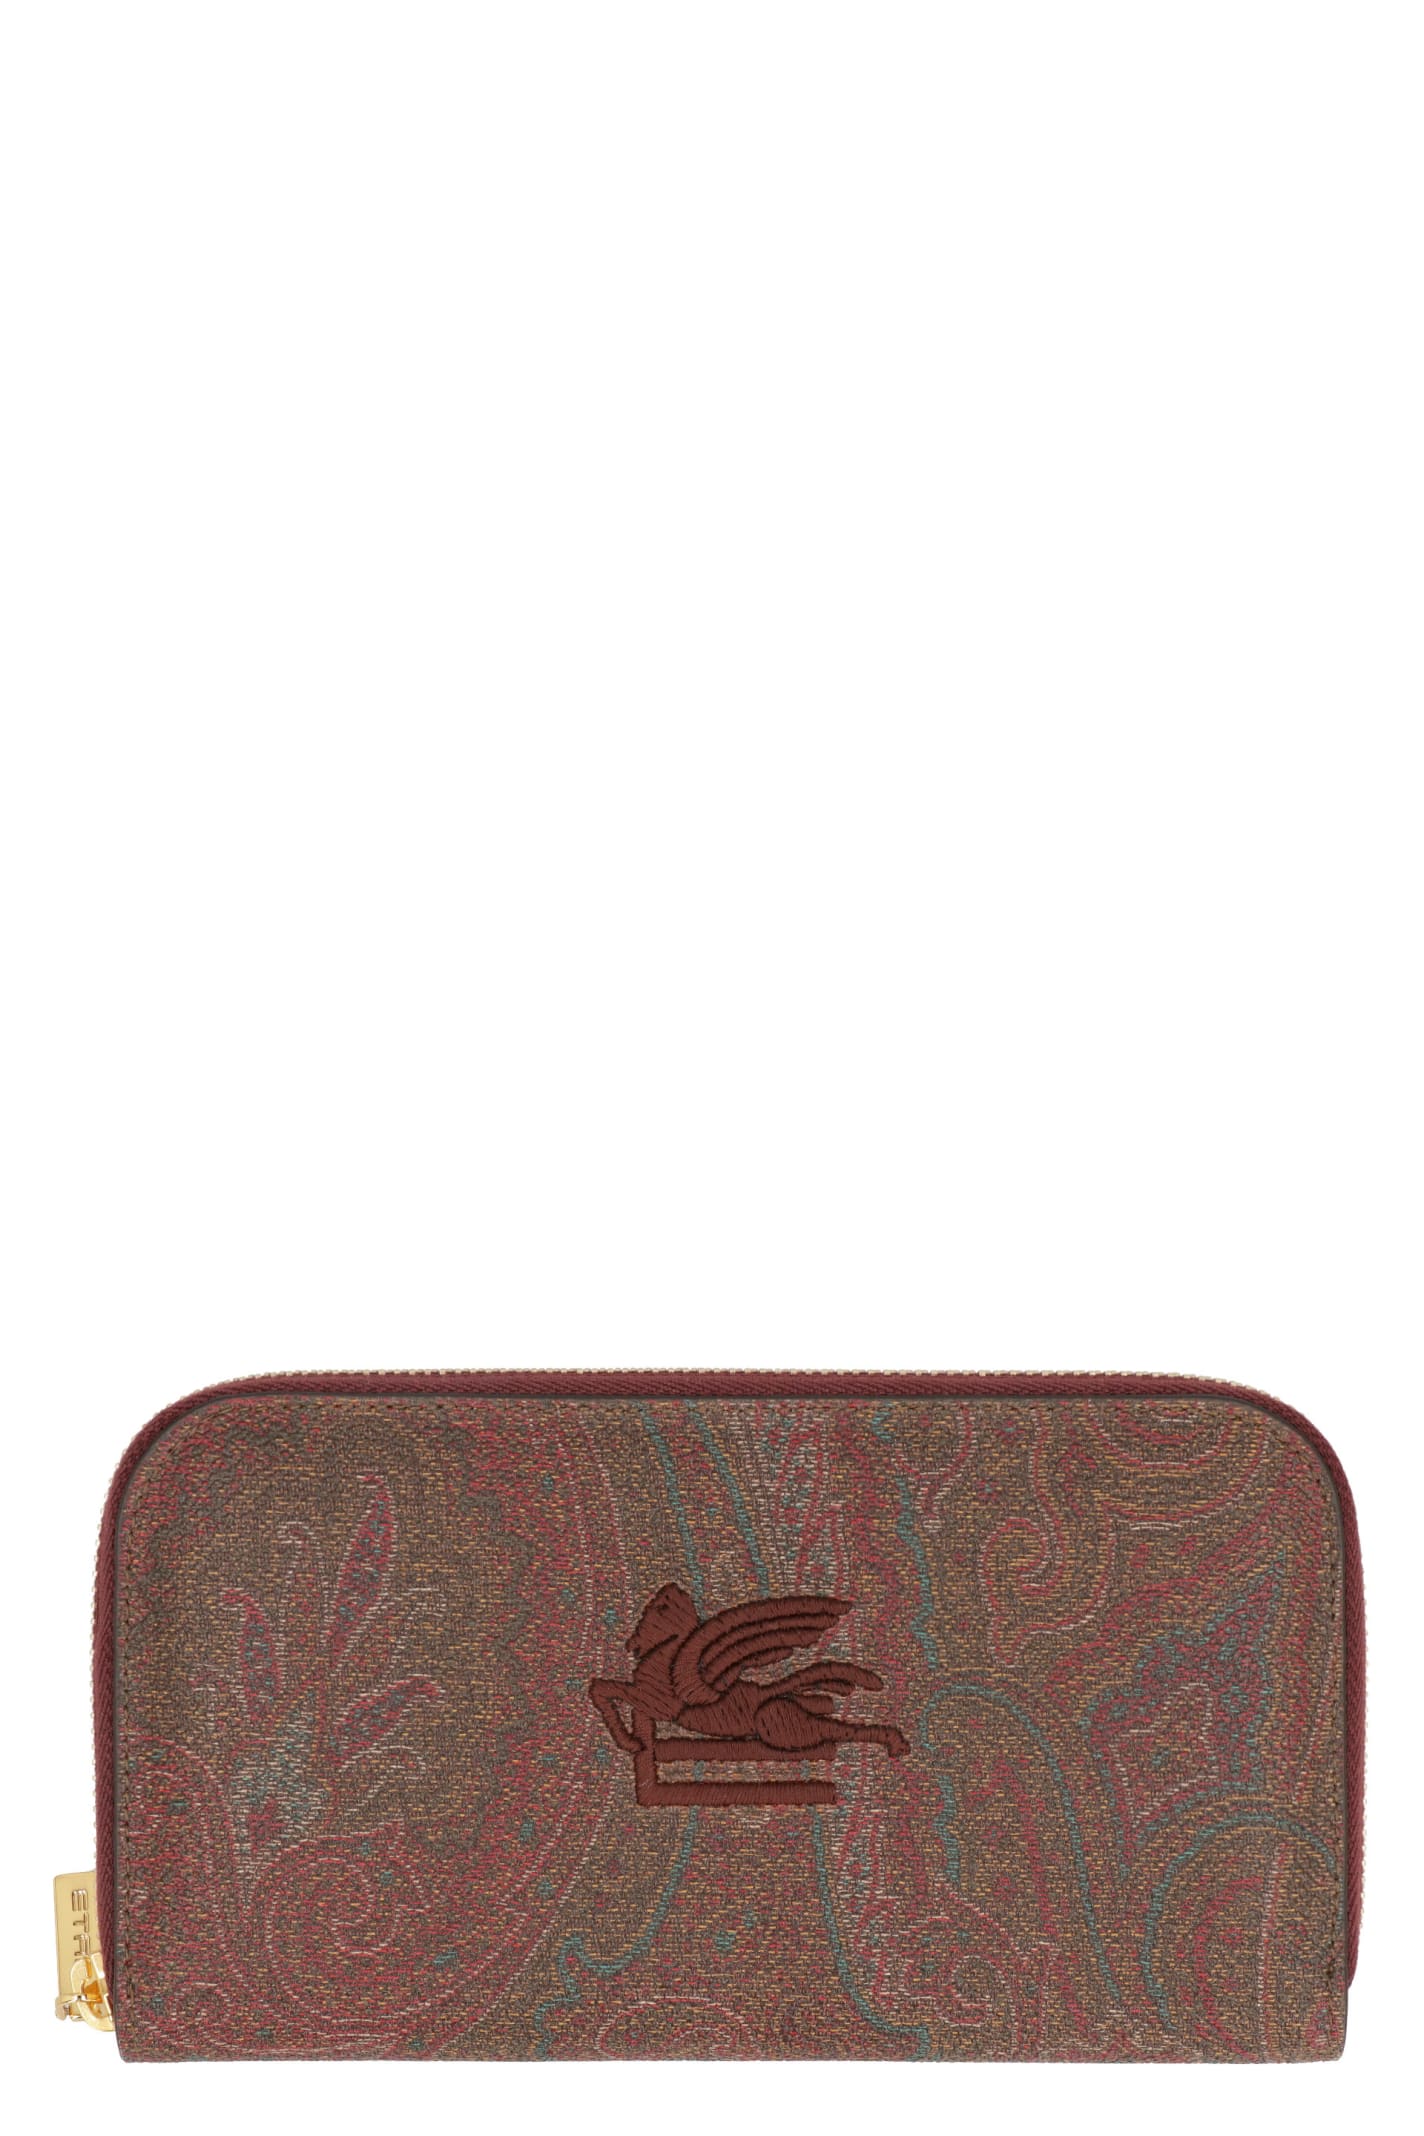 Etro Coated Canvas Wallet